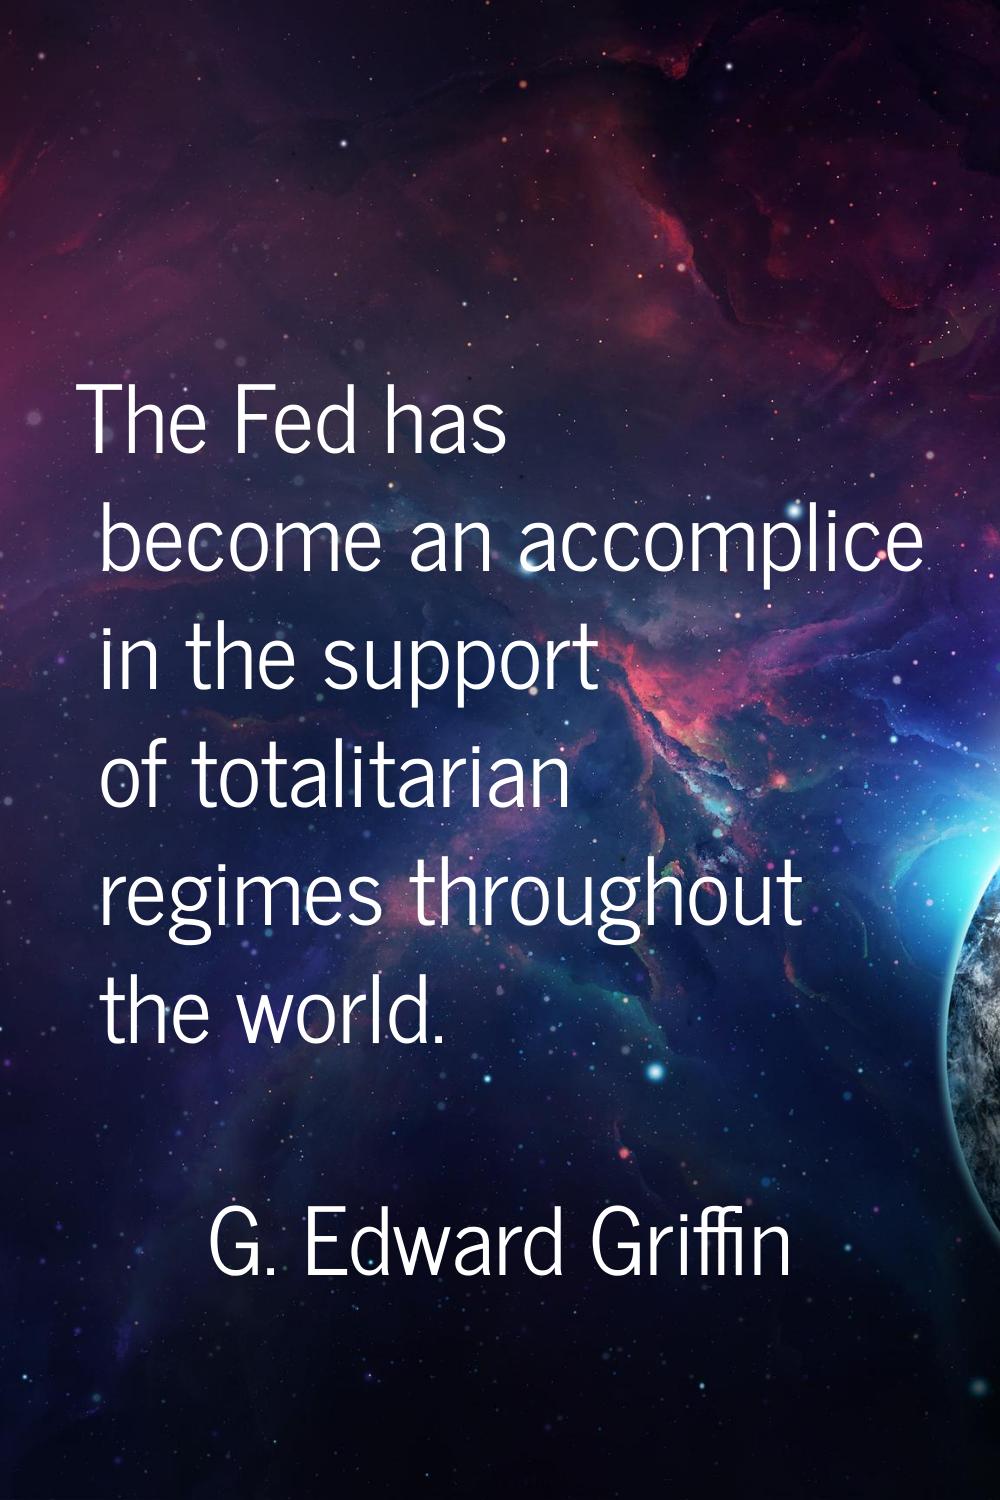 The Fed has become an accomplice in the support of totalitarian regimes throughout the world.